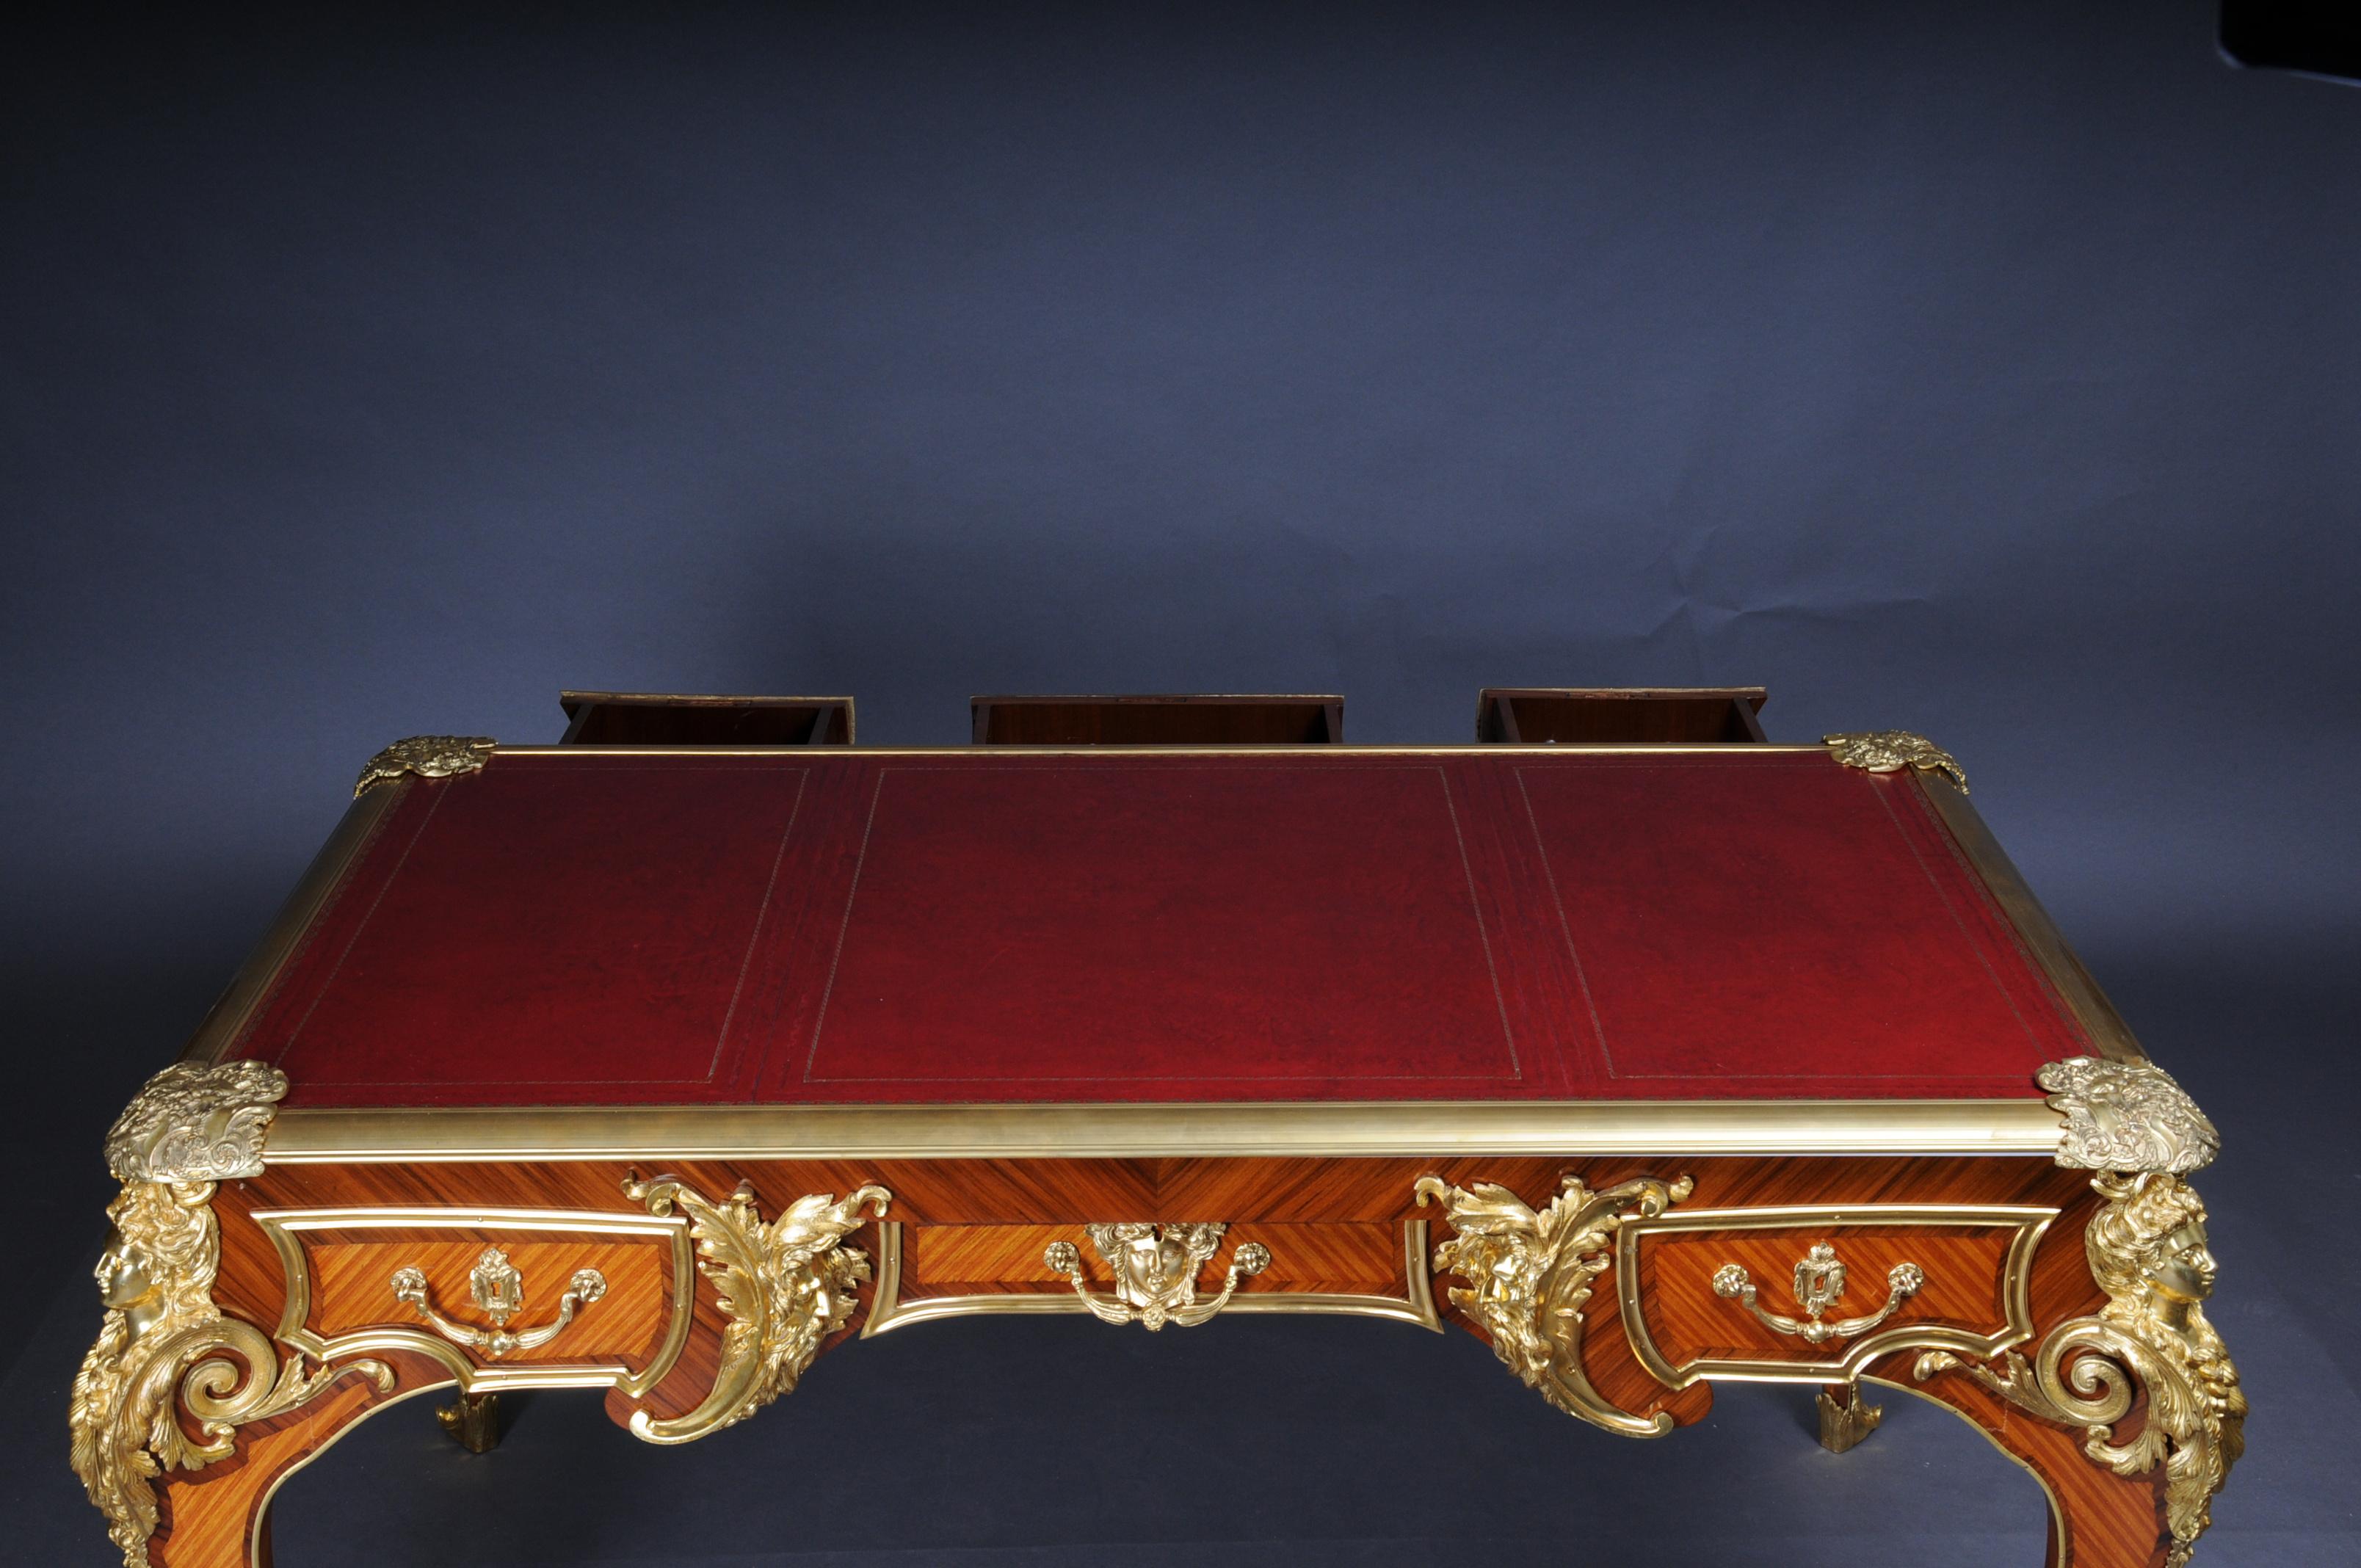 20th Century Bureau Plat or Desk by the Model of Andre Charles Boulle For Sale 8